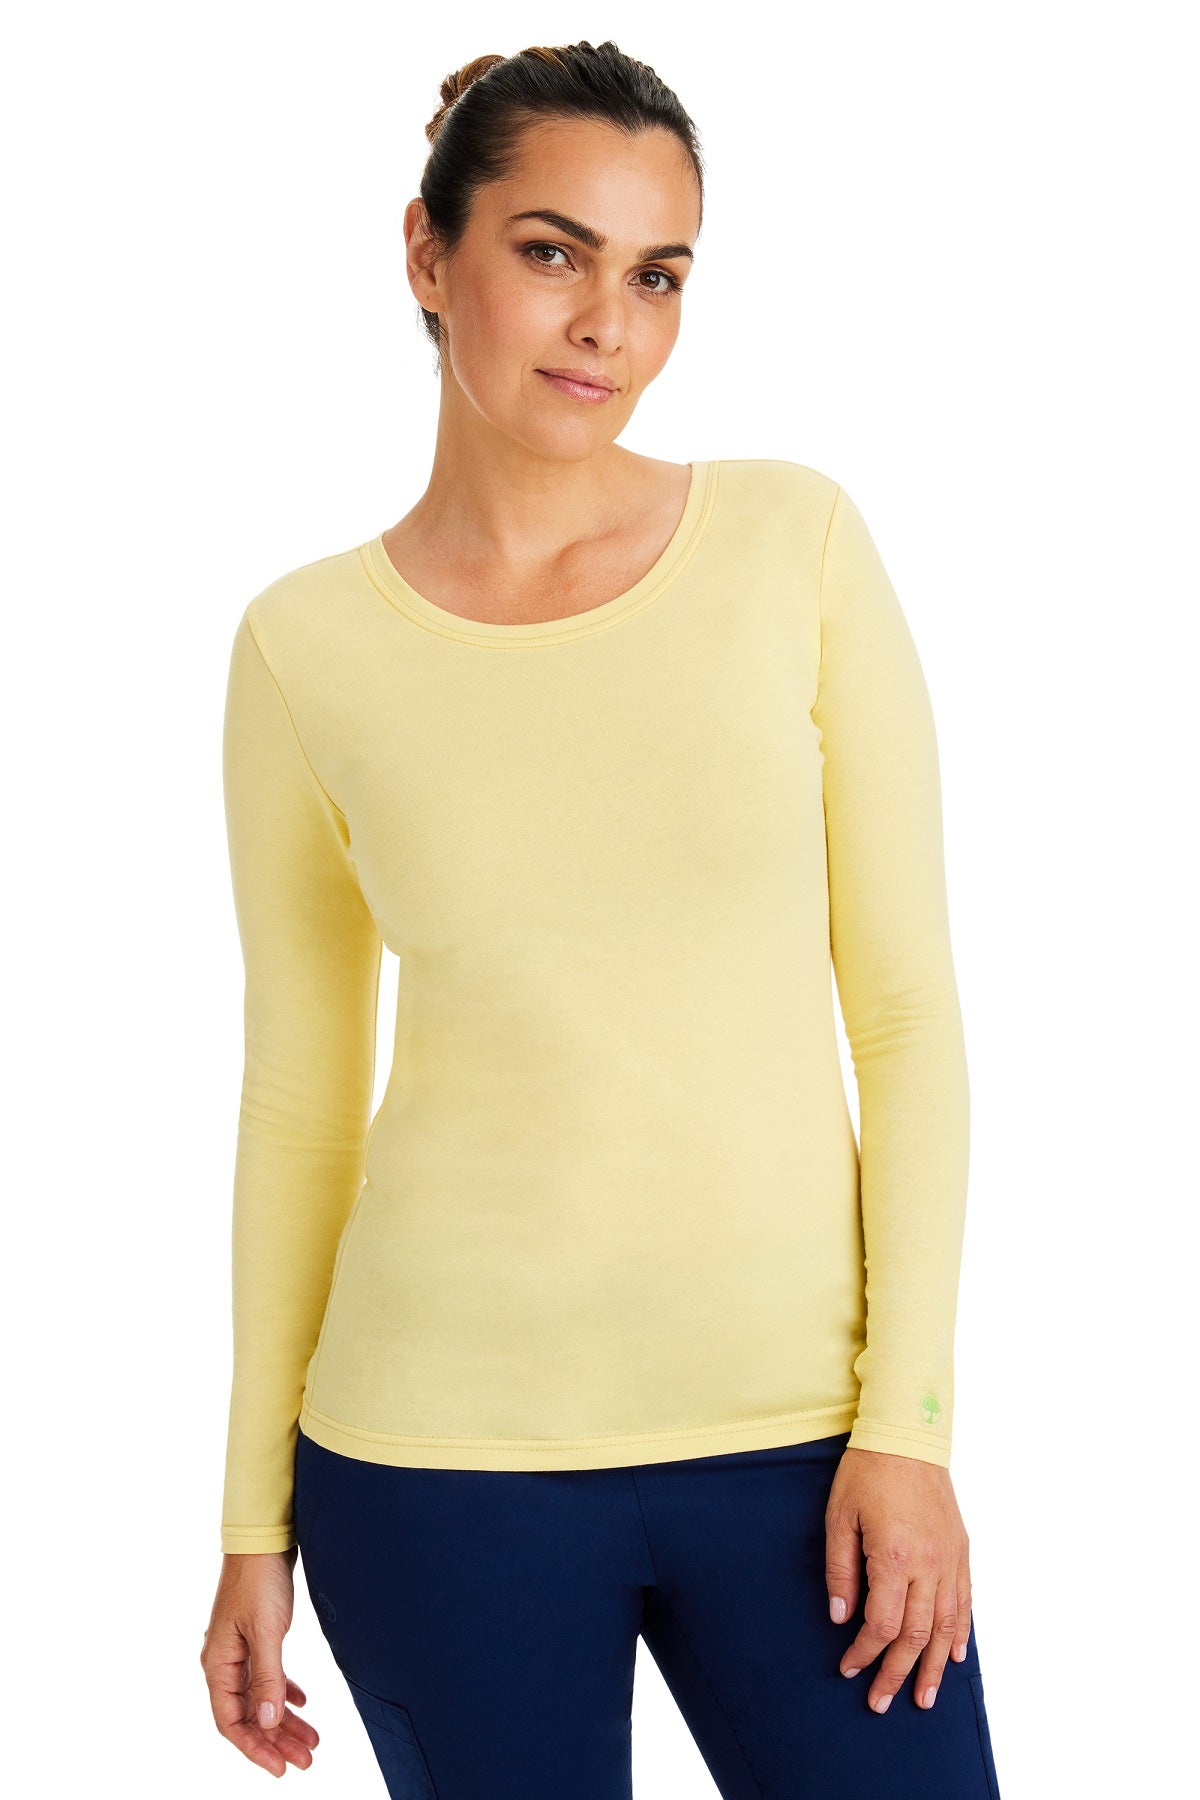 Healing Hands Purple Label Melissa Long Sleeve Tee in Canary at Parker's Clothing and Shoes.